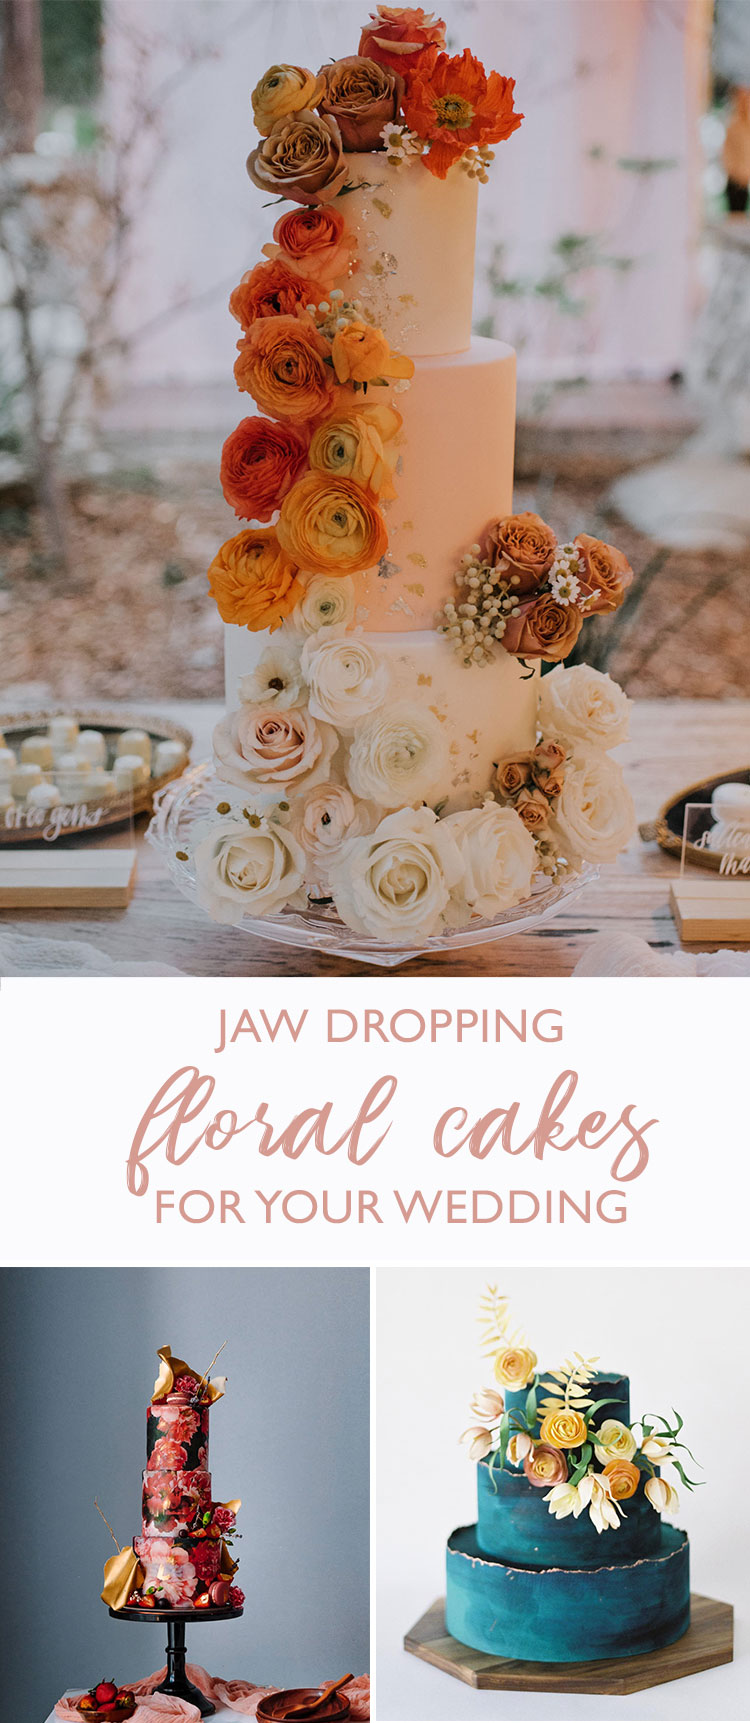 15 Jaw-Dropping Floral Cake Ideas for Your Wedding